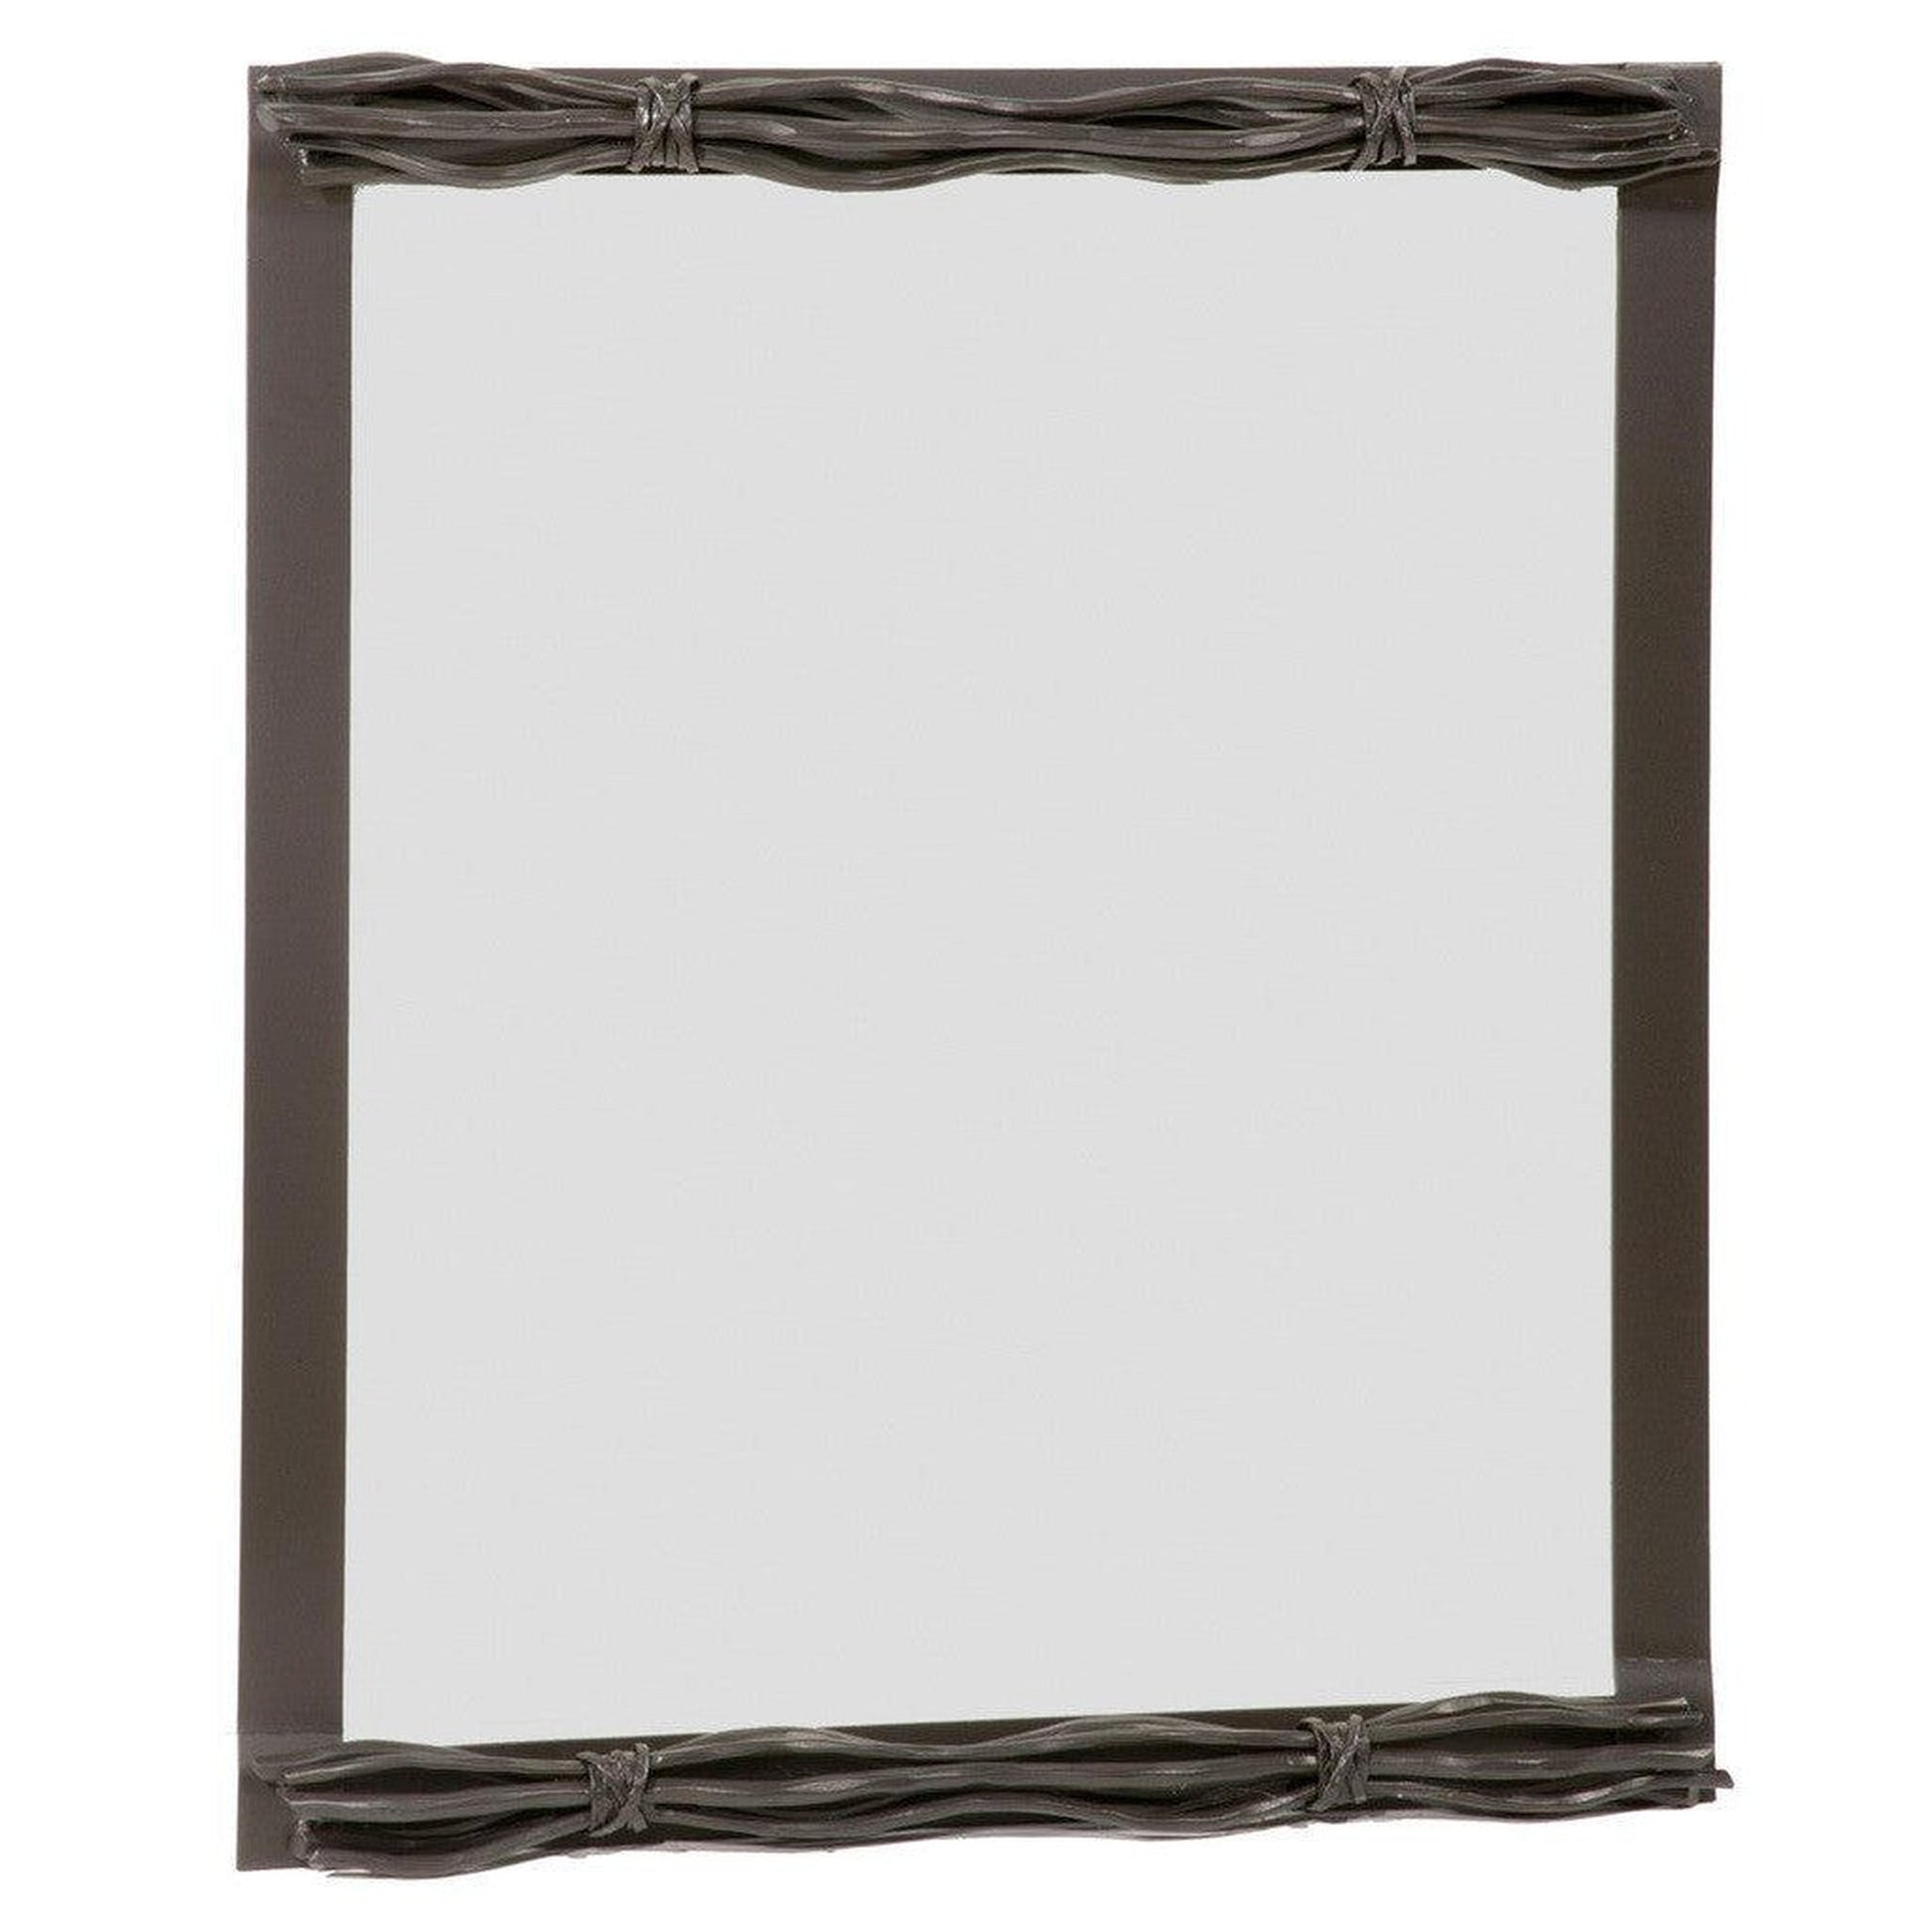 Stone County Ironworks Rush 26" x 38" Large Satin Black Iron Wall Mirror With Copper Iron Accent